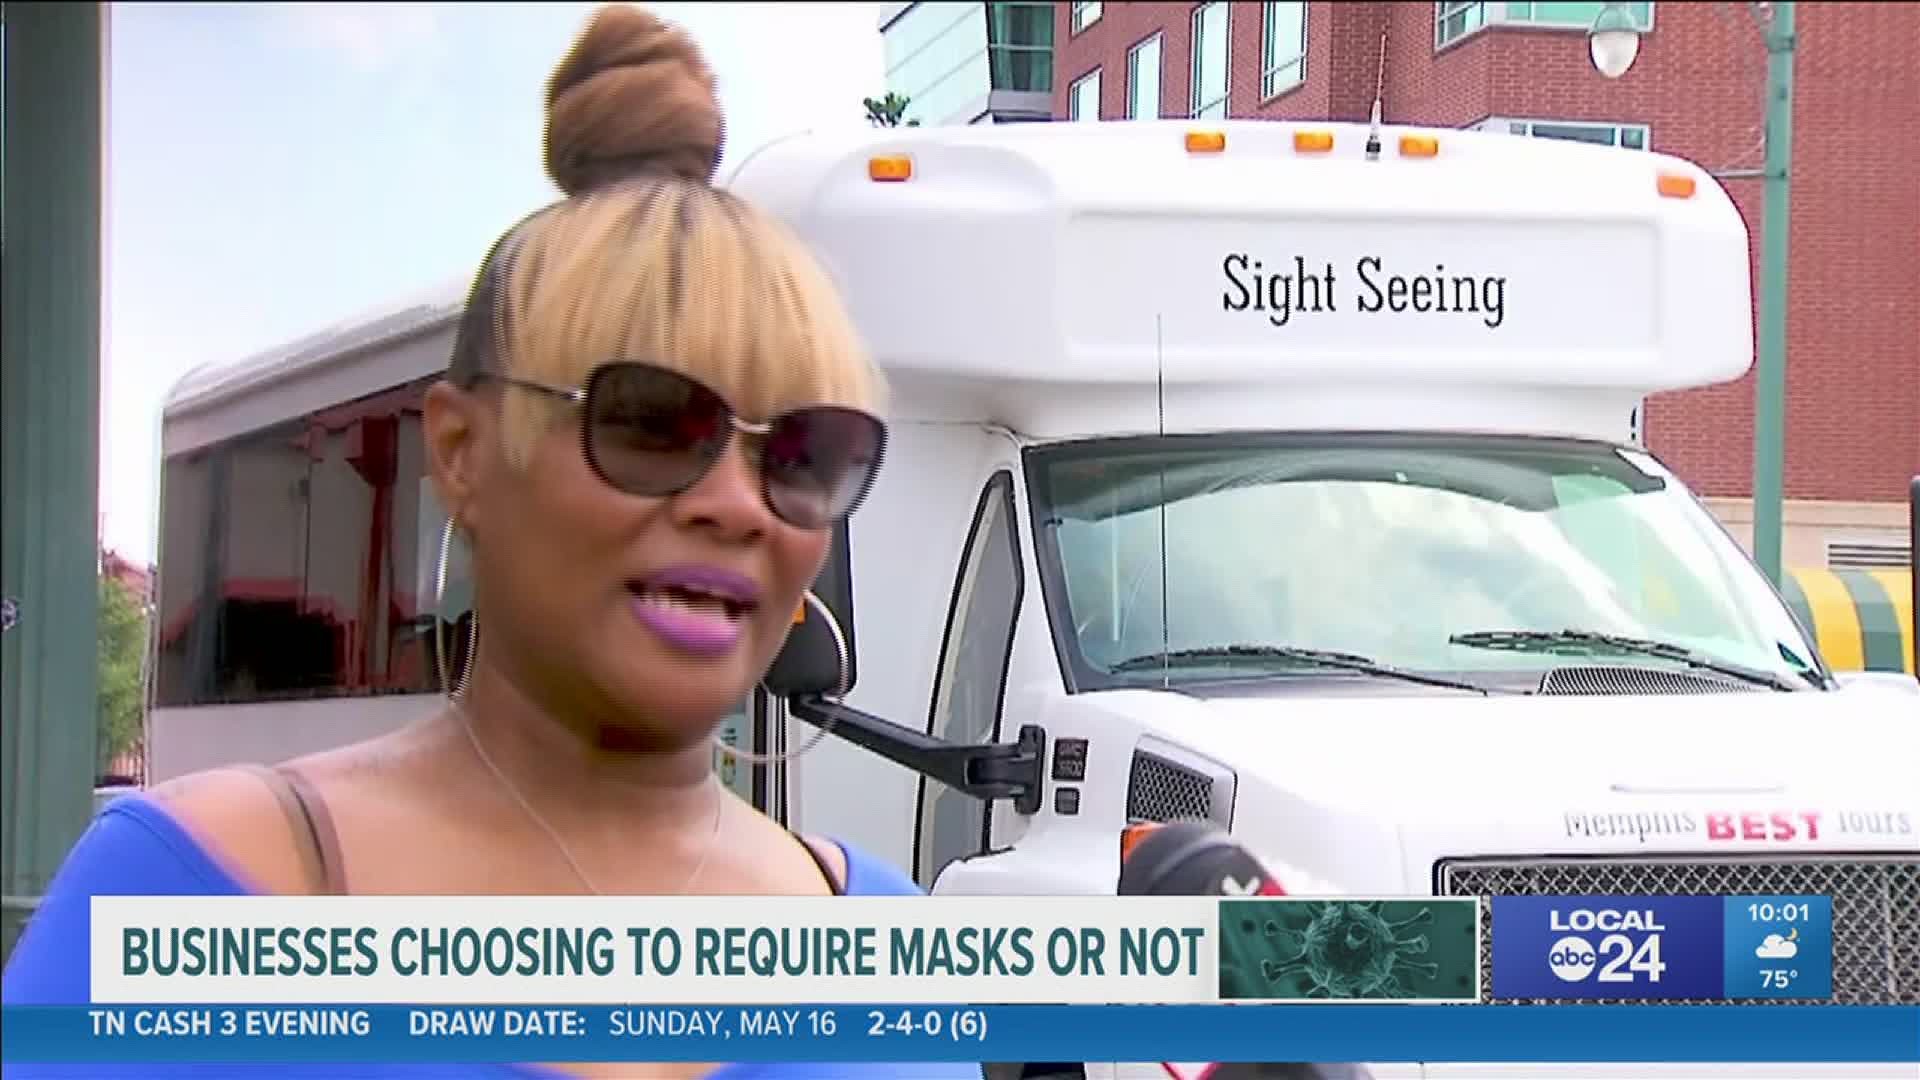 Shelby County Health Department’s latest health directive gives discretion regarding the wearing of masks in businesses, restaurants, and other locations.